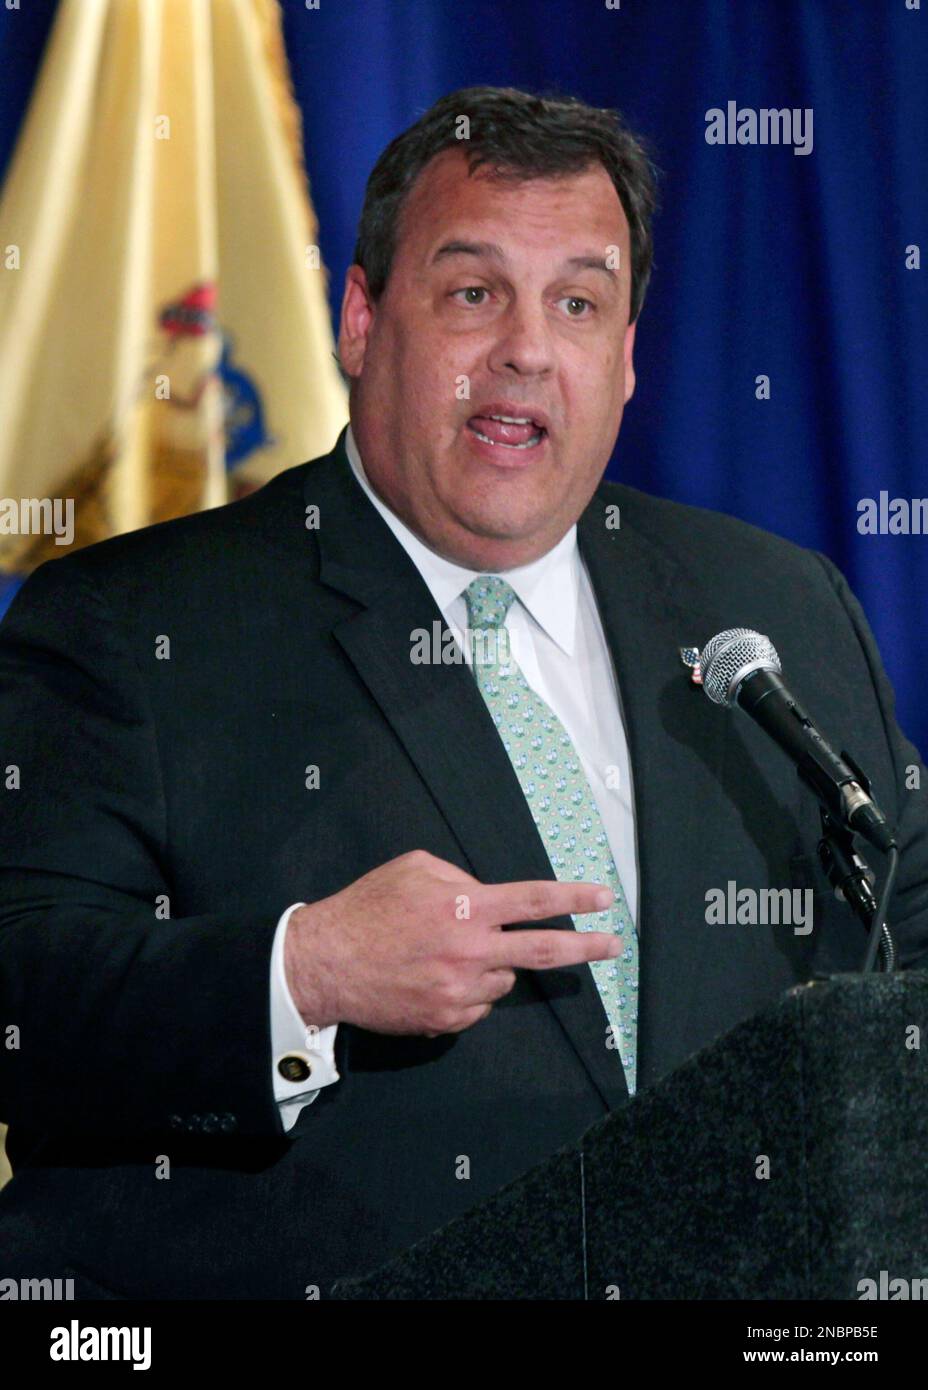 Gov. Chris Christie answers a question Thursday, June 2, 2011, in Denville, N.J., as he says he used a state police helicopter for two personal trips, including to fly to his son's baseball game. Christie and the State Republican Committee are reimbursing the state for the governor's personal use of the helicopter. (AP Photo/Mel Evans) Stock Photo